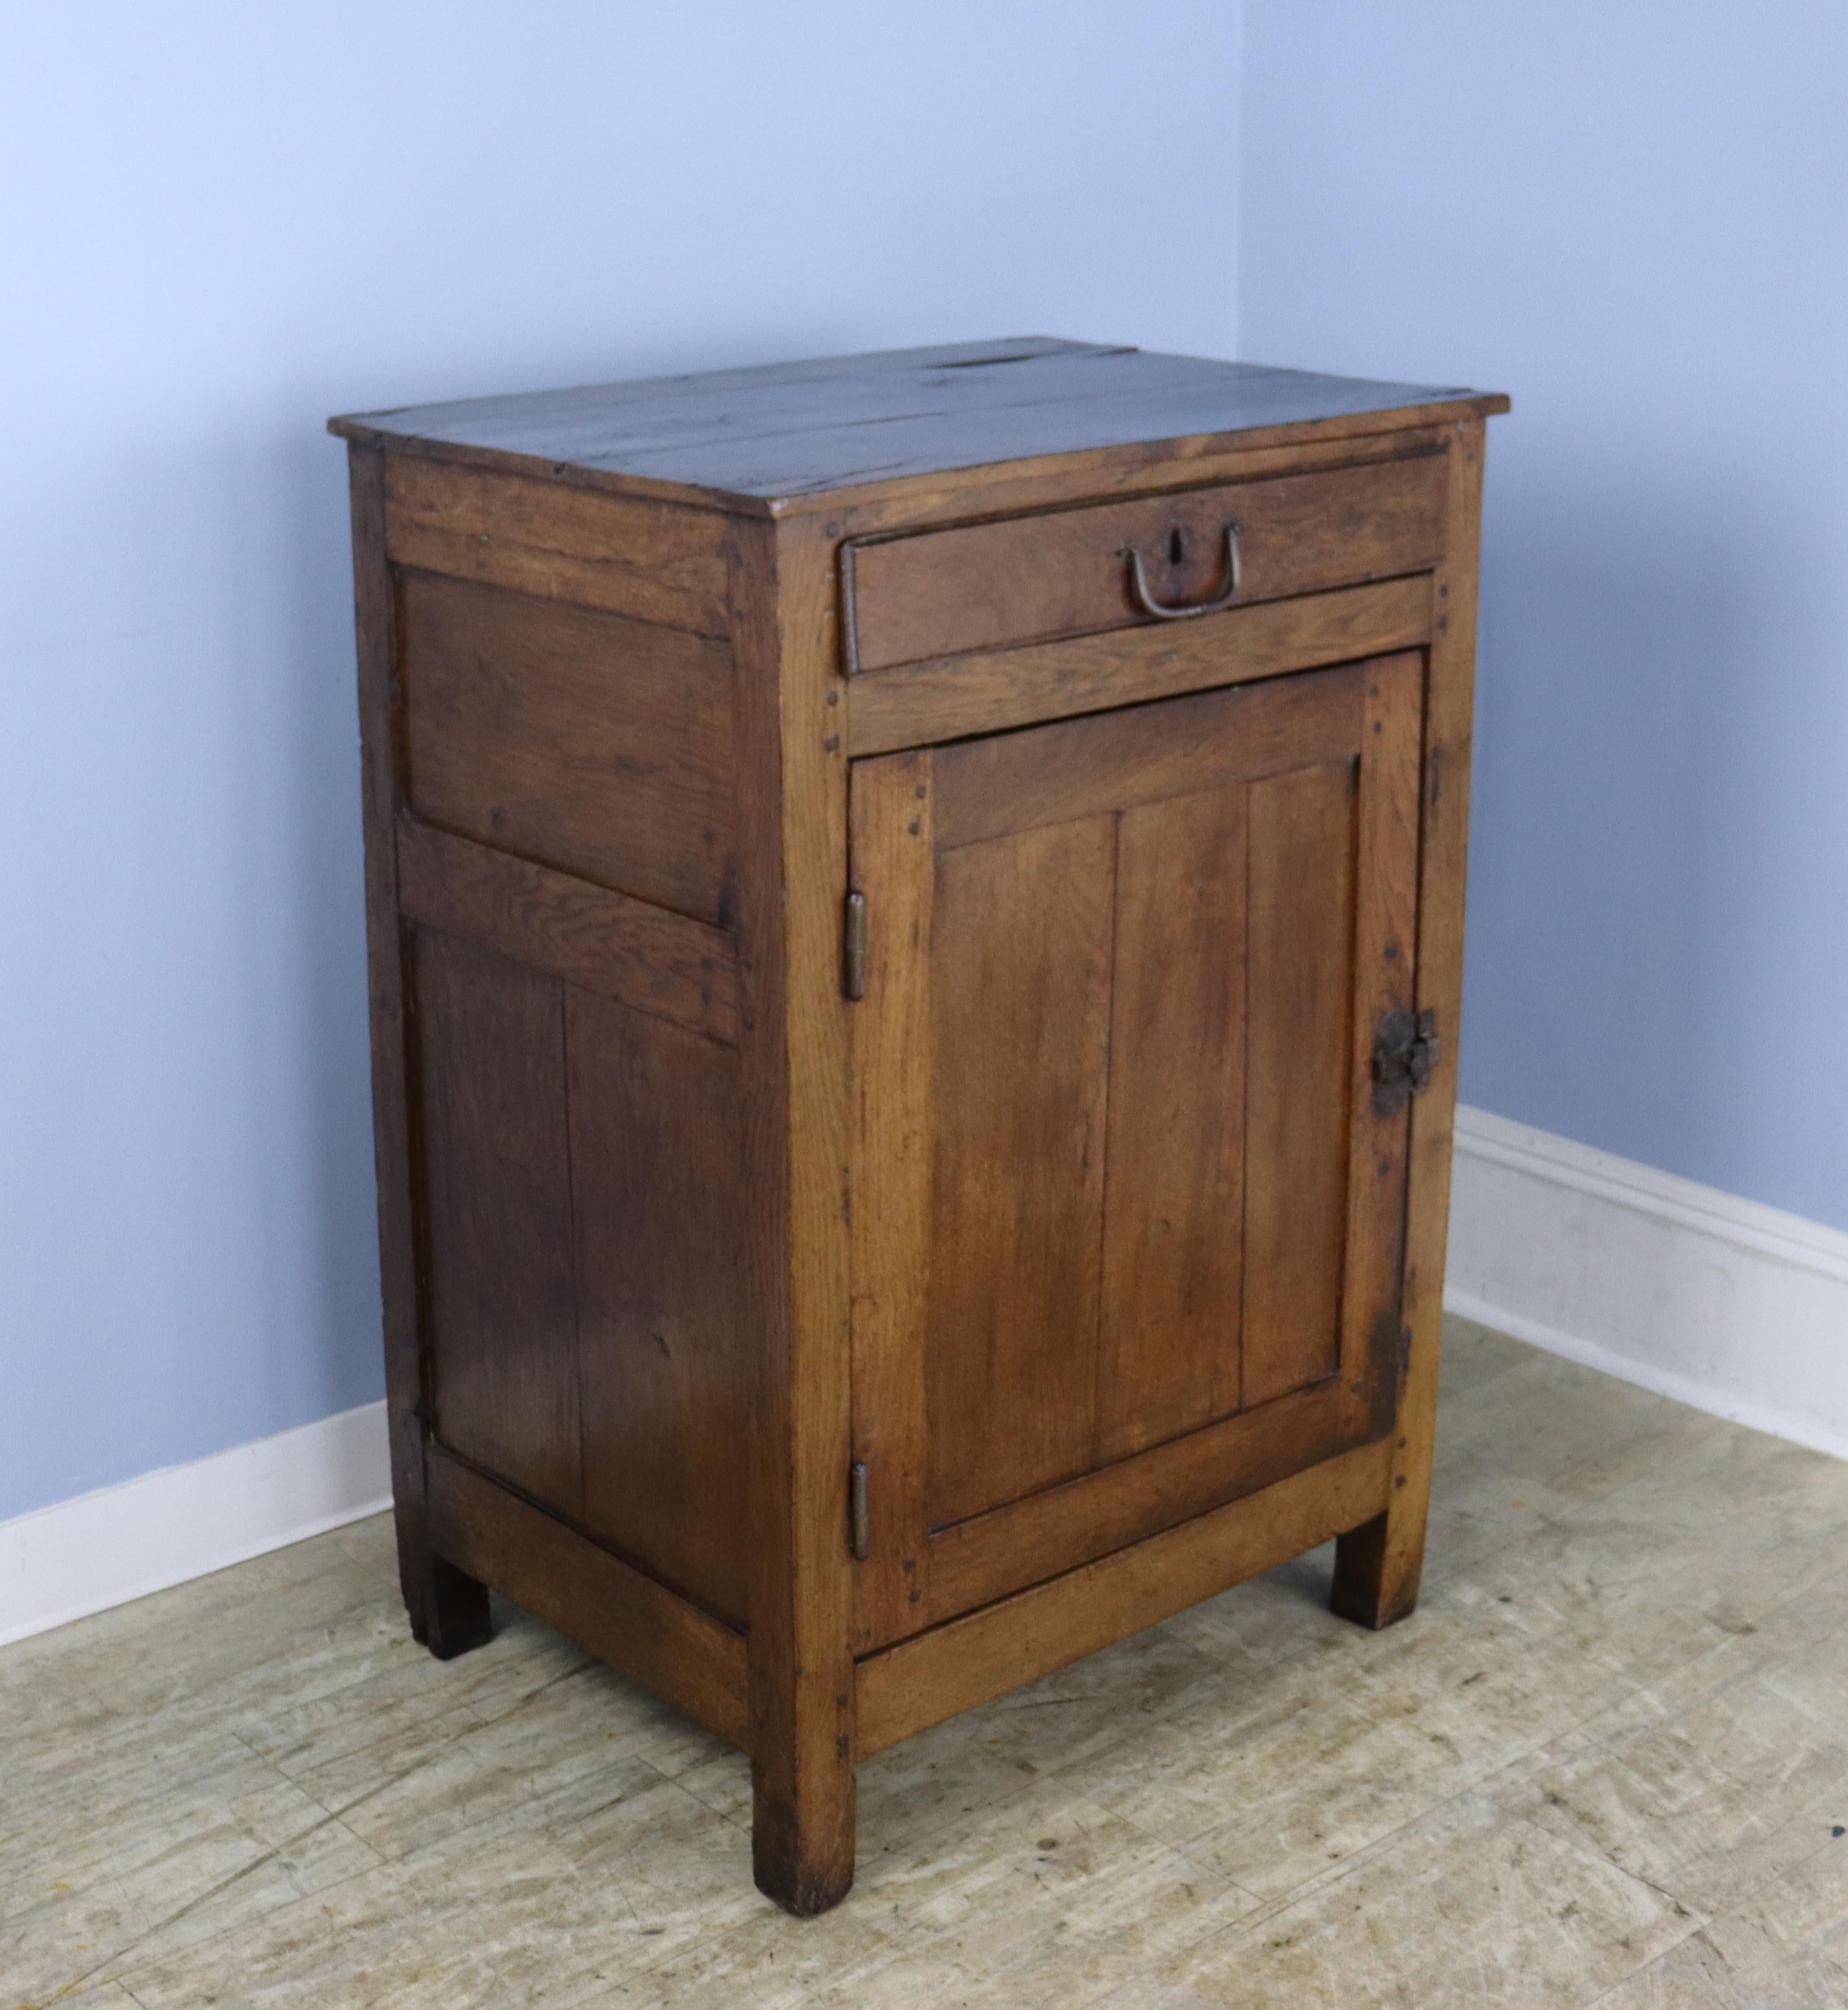 A handsome early French jamming cupbord, originally used for kitchen storage and still in very nice antique condtion.  Good interior storage with one center non-adjustable shelf and a roomy drawer overhead.  The oak has great color and patina and